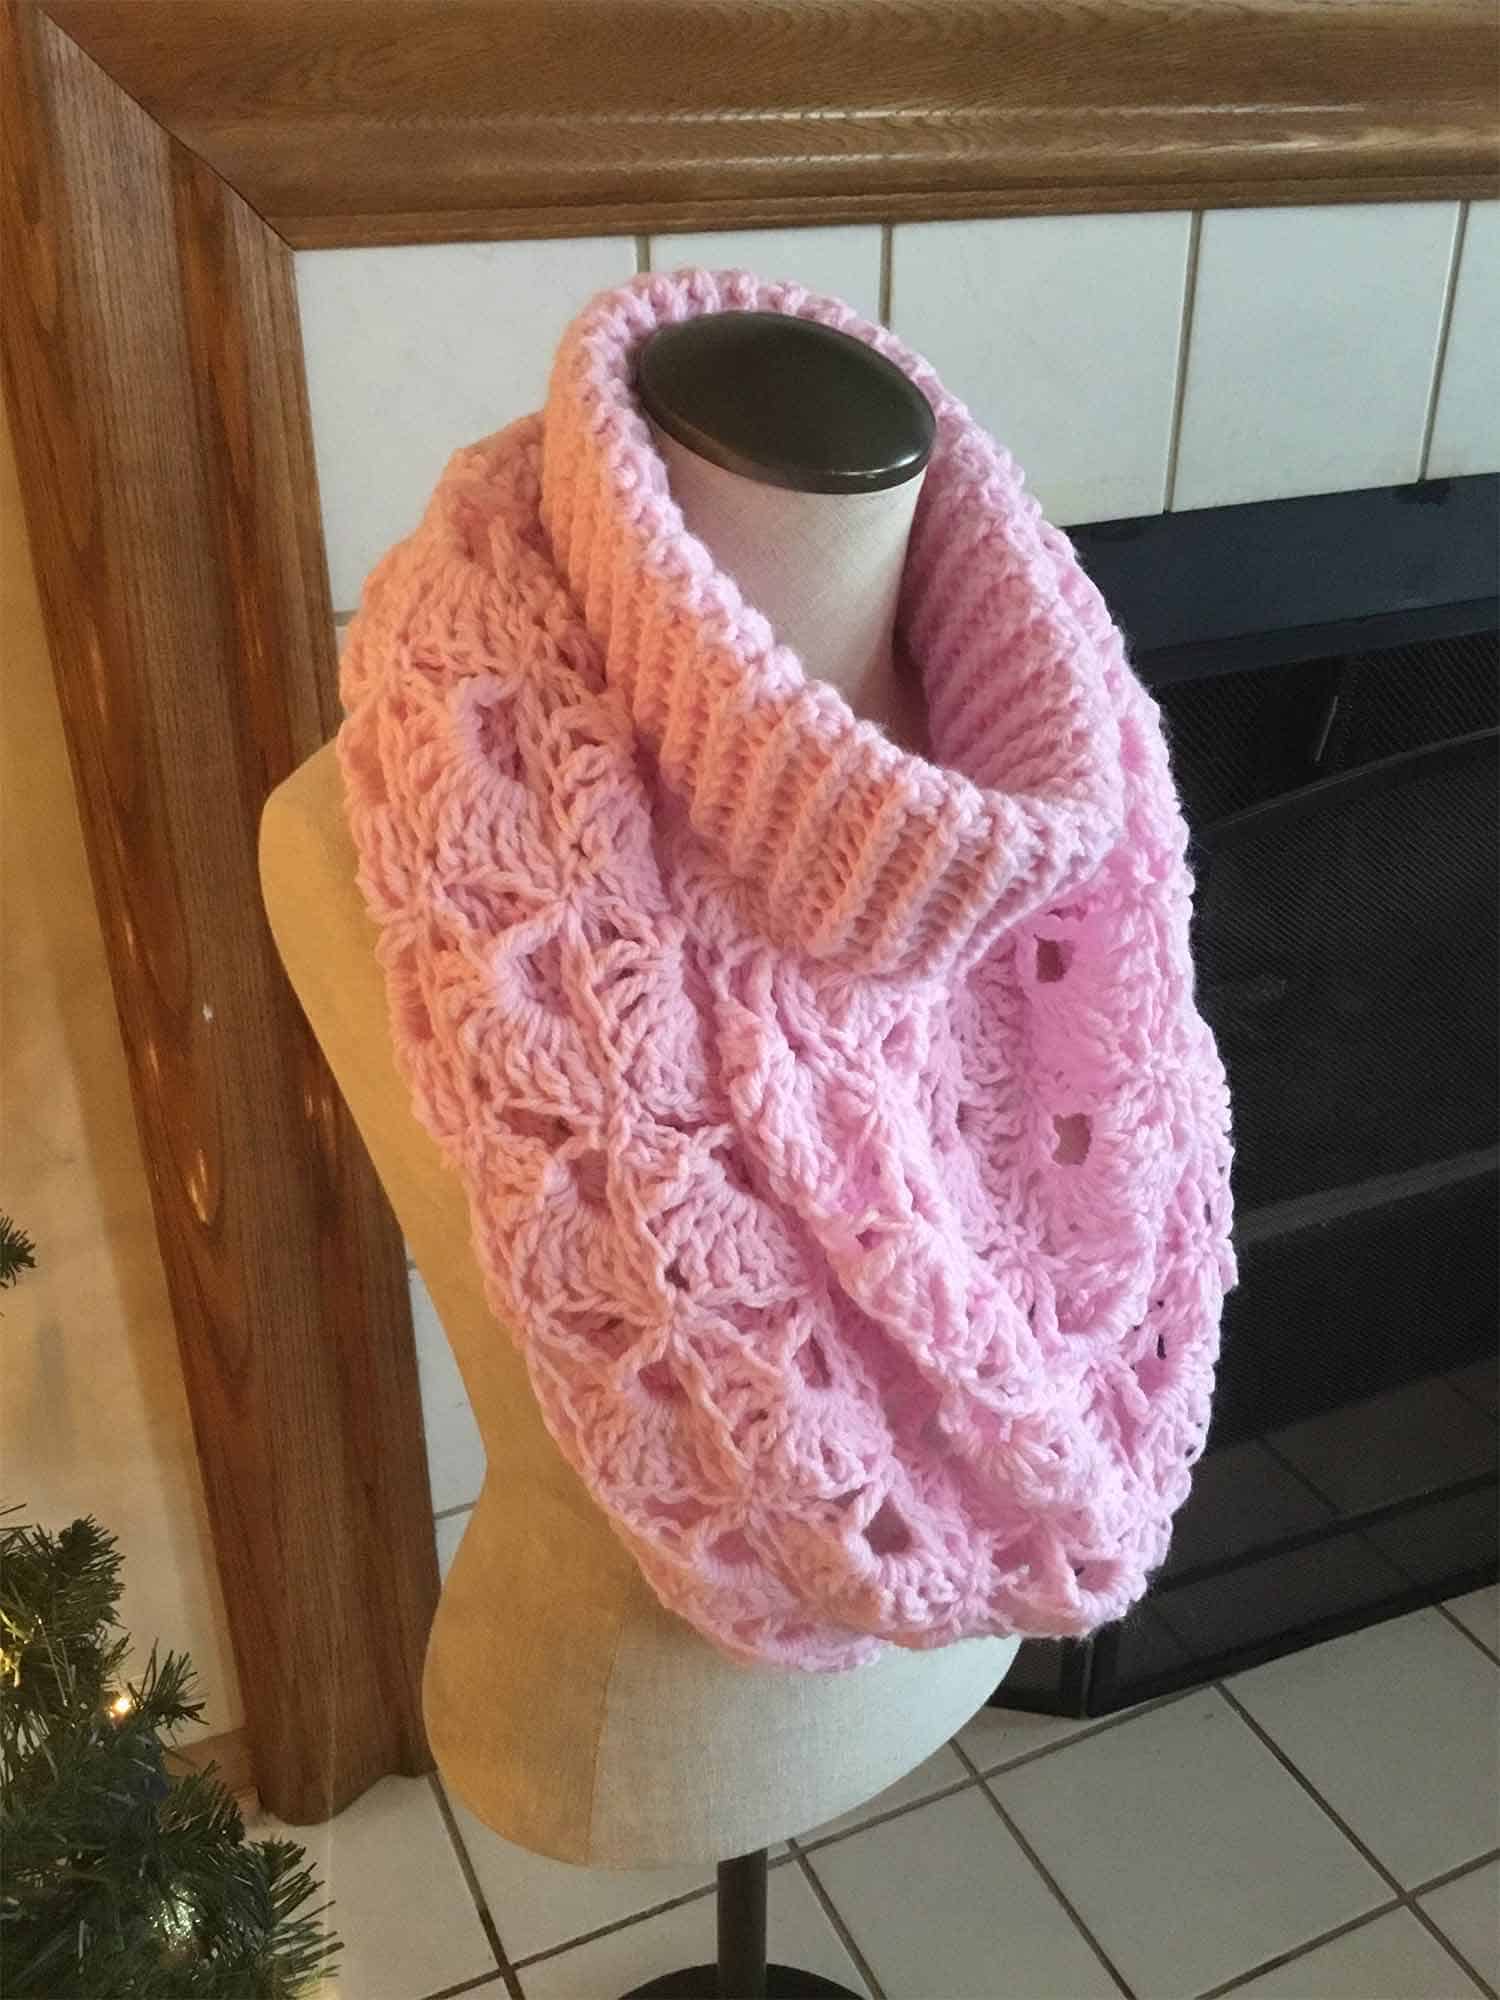 This Classy Pink Neck Cowl is made with love by Classy Crafty Wife! Shop more unique gift ideas today with Spots Initiatives, the best way to support creators.